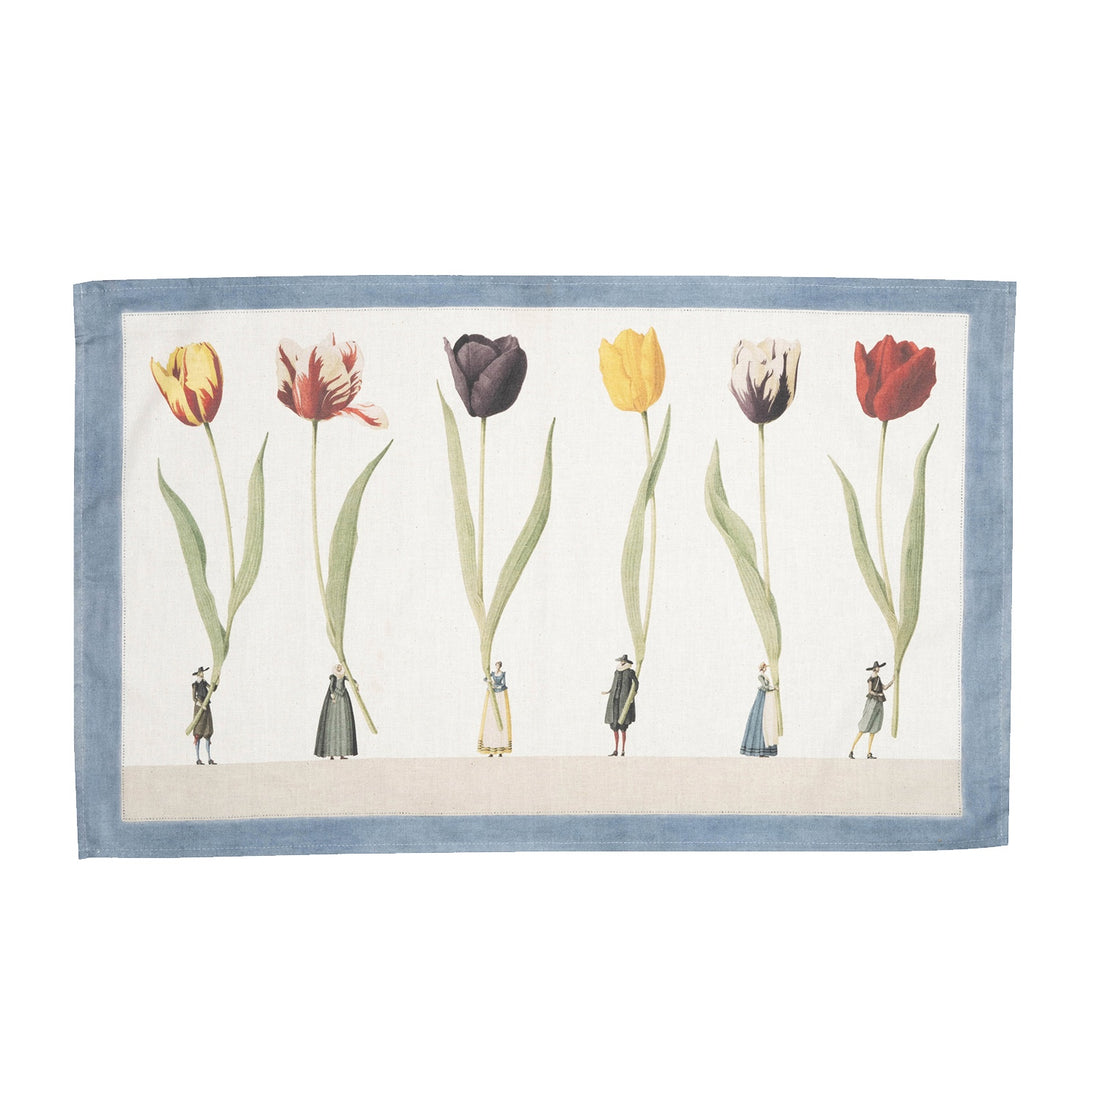 A Hester &amp; Cook Tulip Parade Tea Towel with tulips on it.